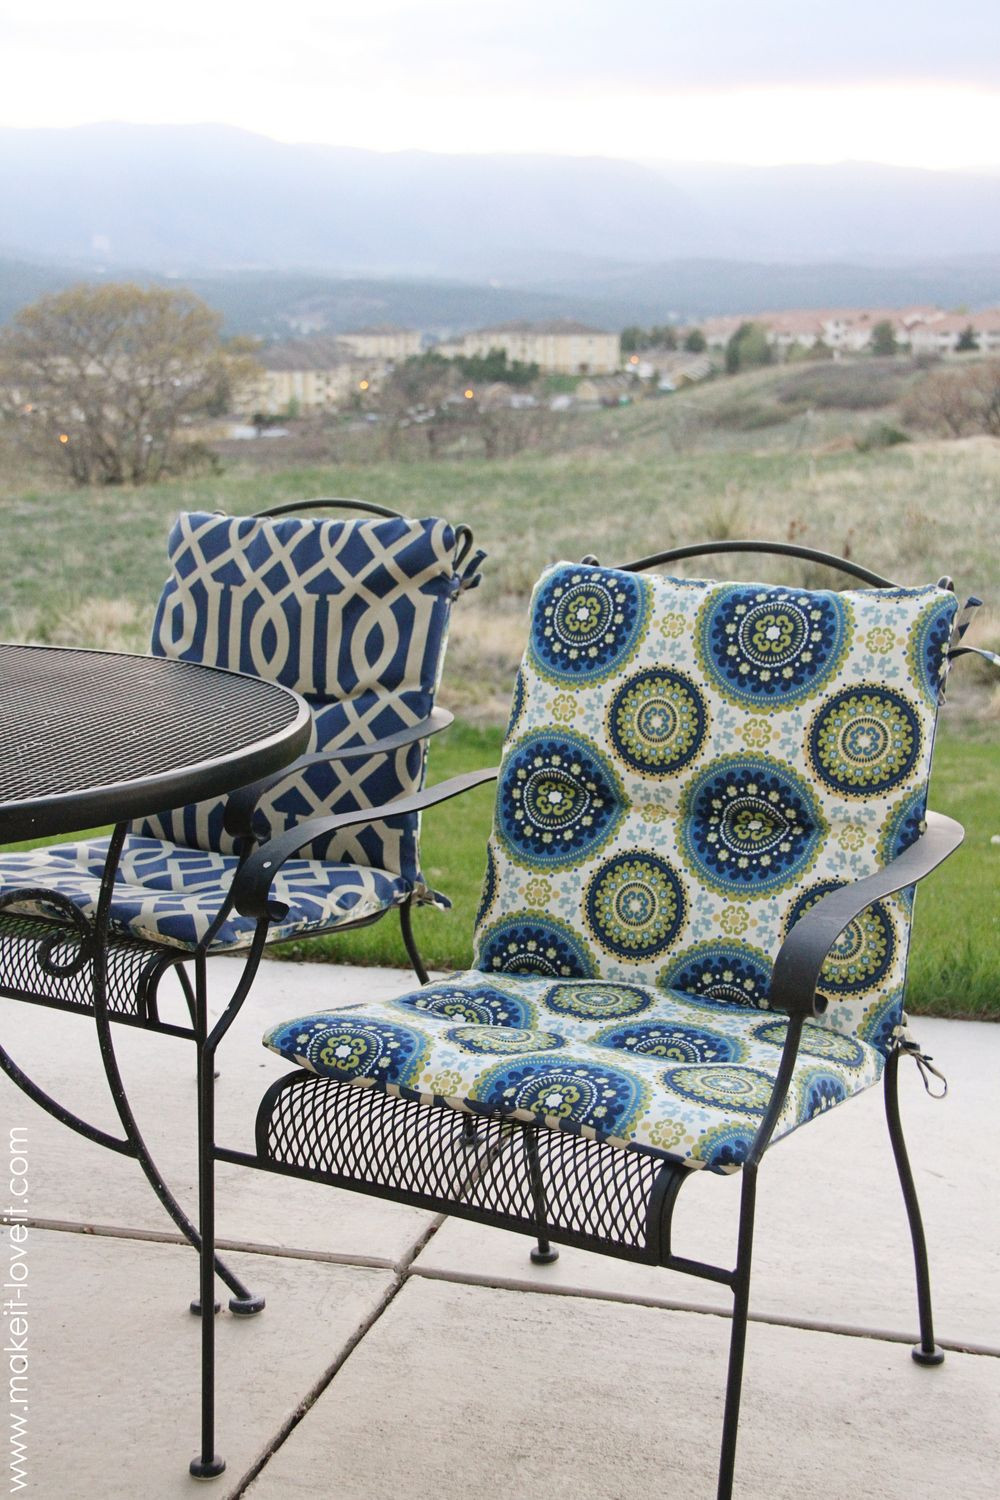 DIY Outdoor Furniture Cushions
 Make your own REVERSIBLE Patio Chair Cushions